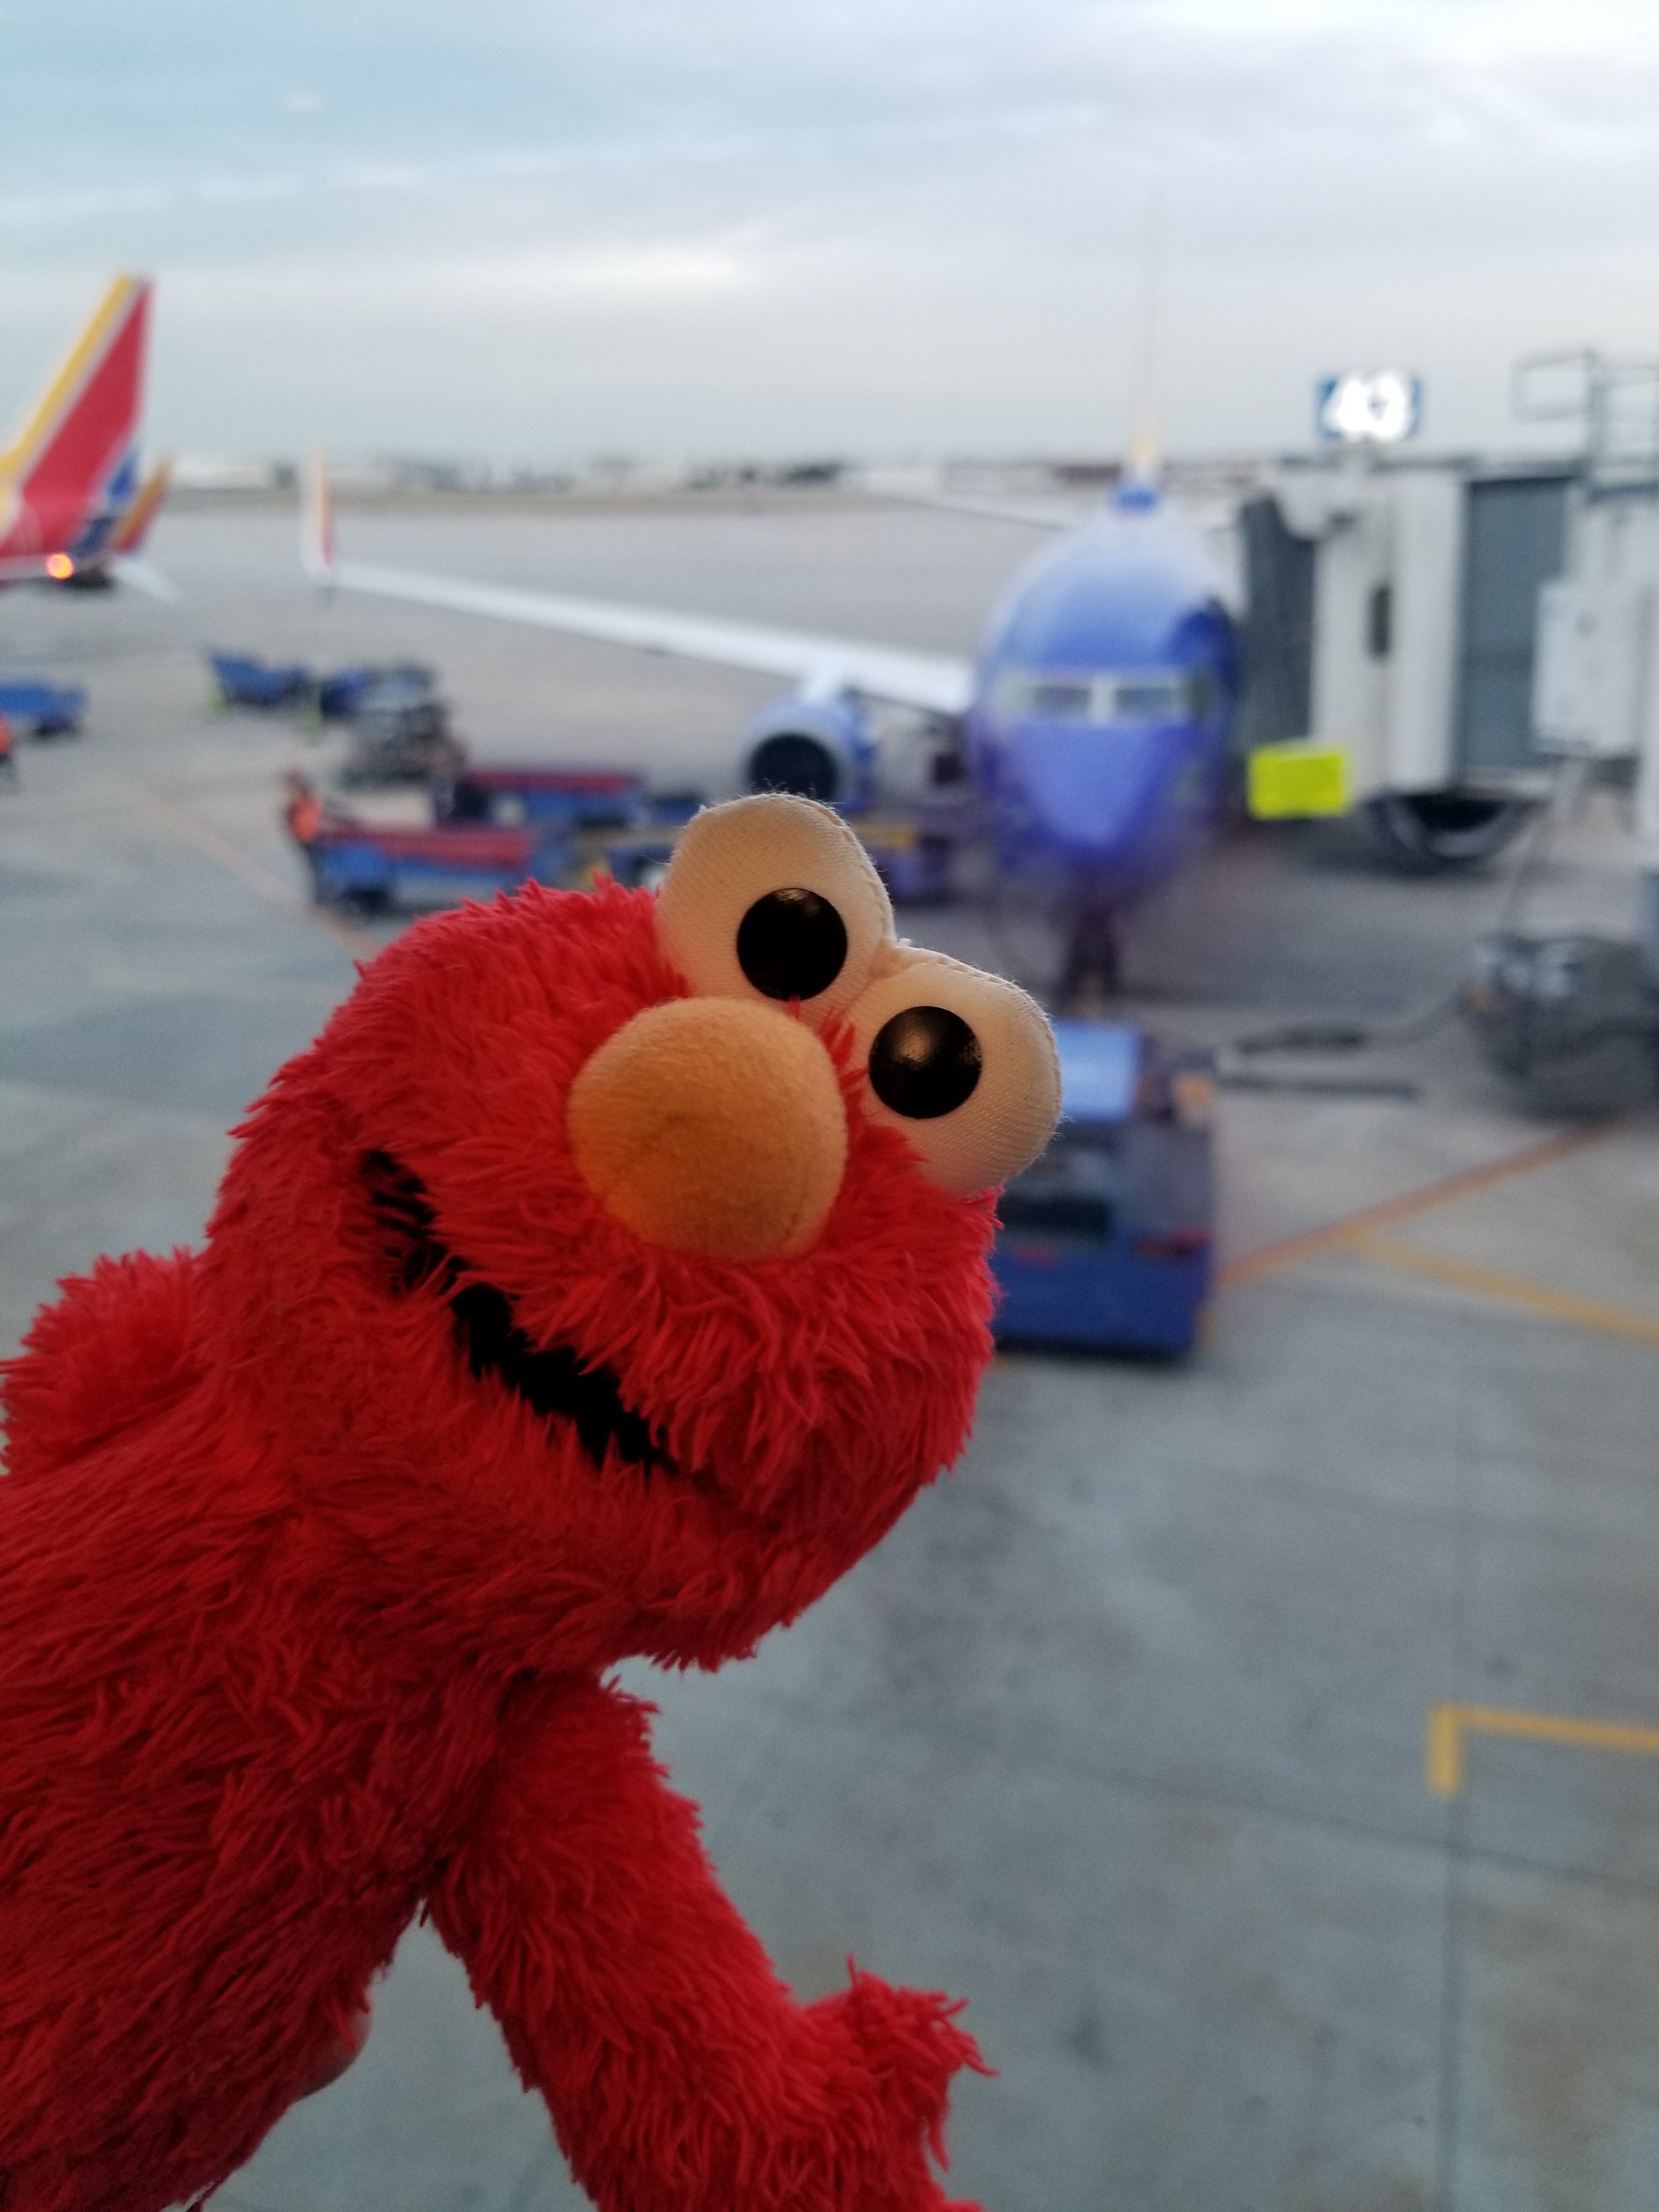 Elmo wonders if this is his plane? Sorry Elmo, not this one!